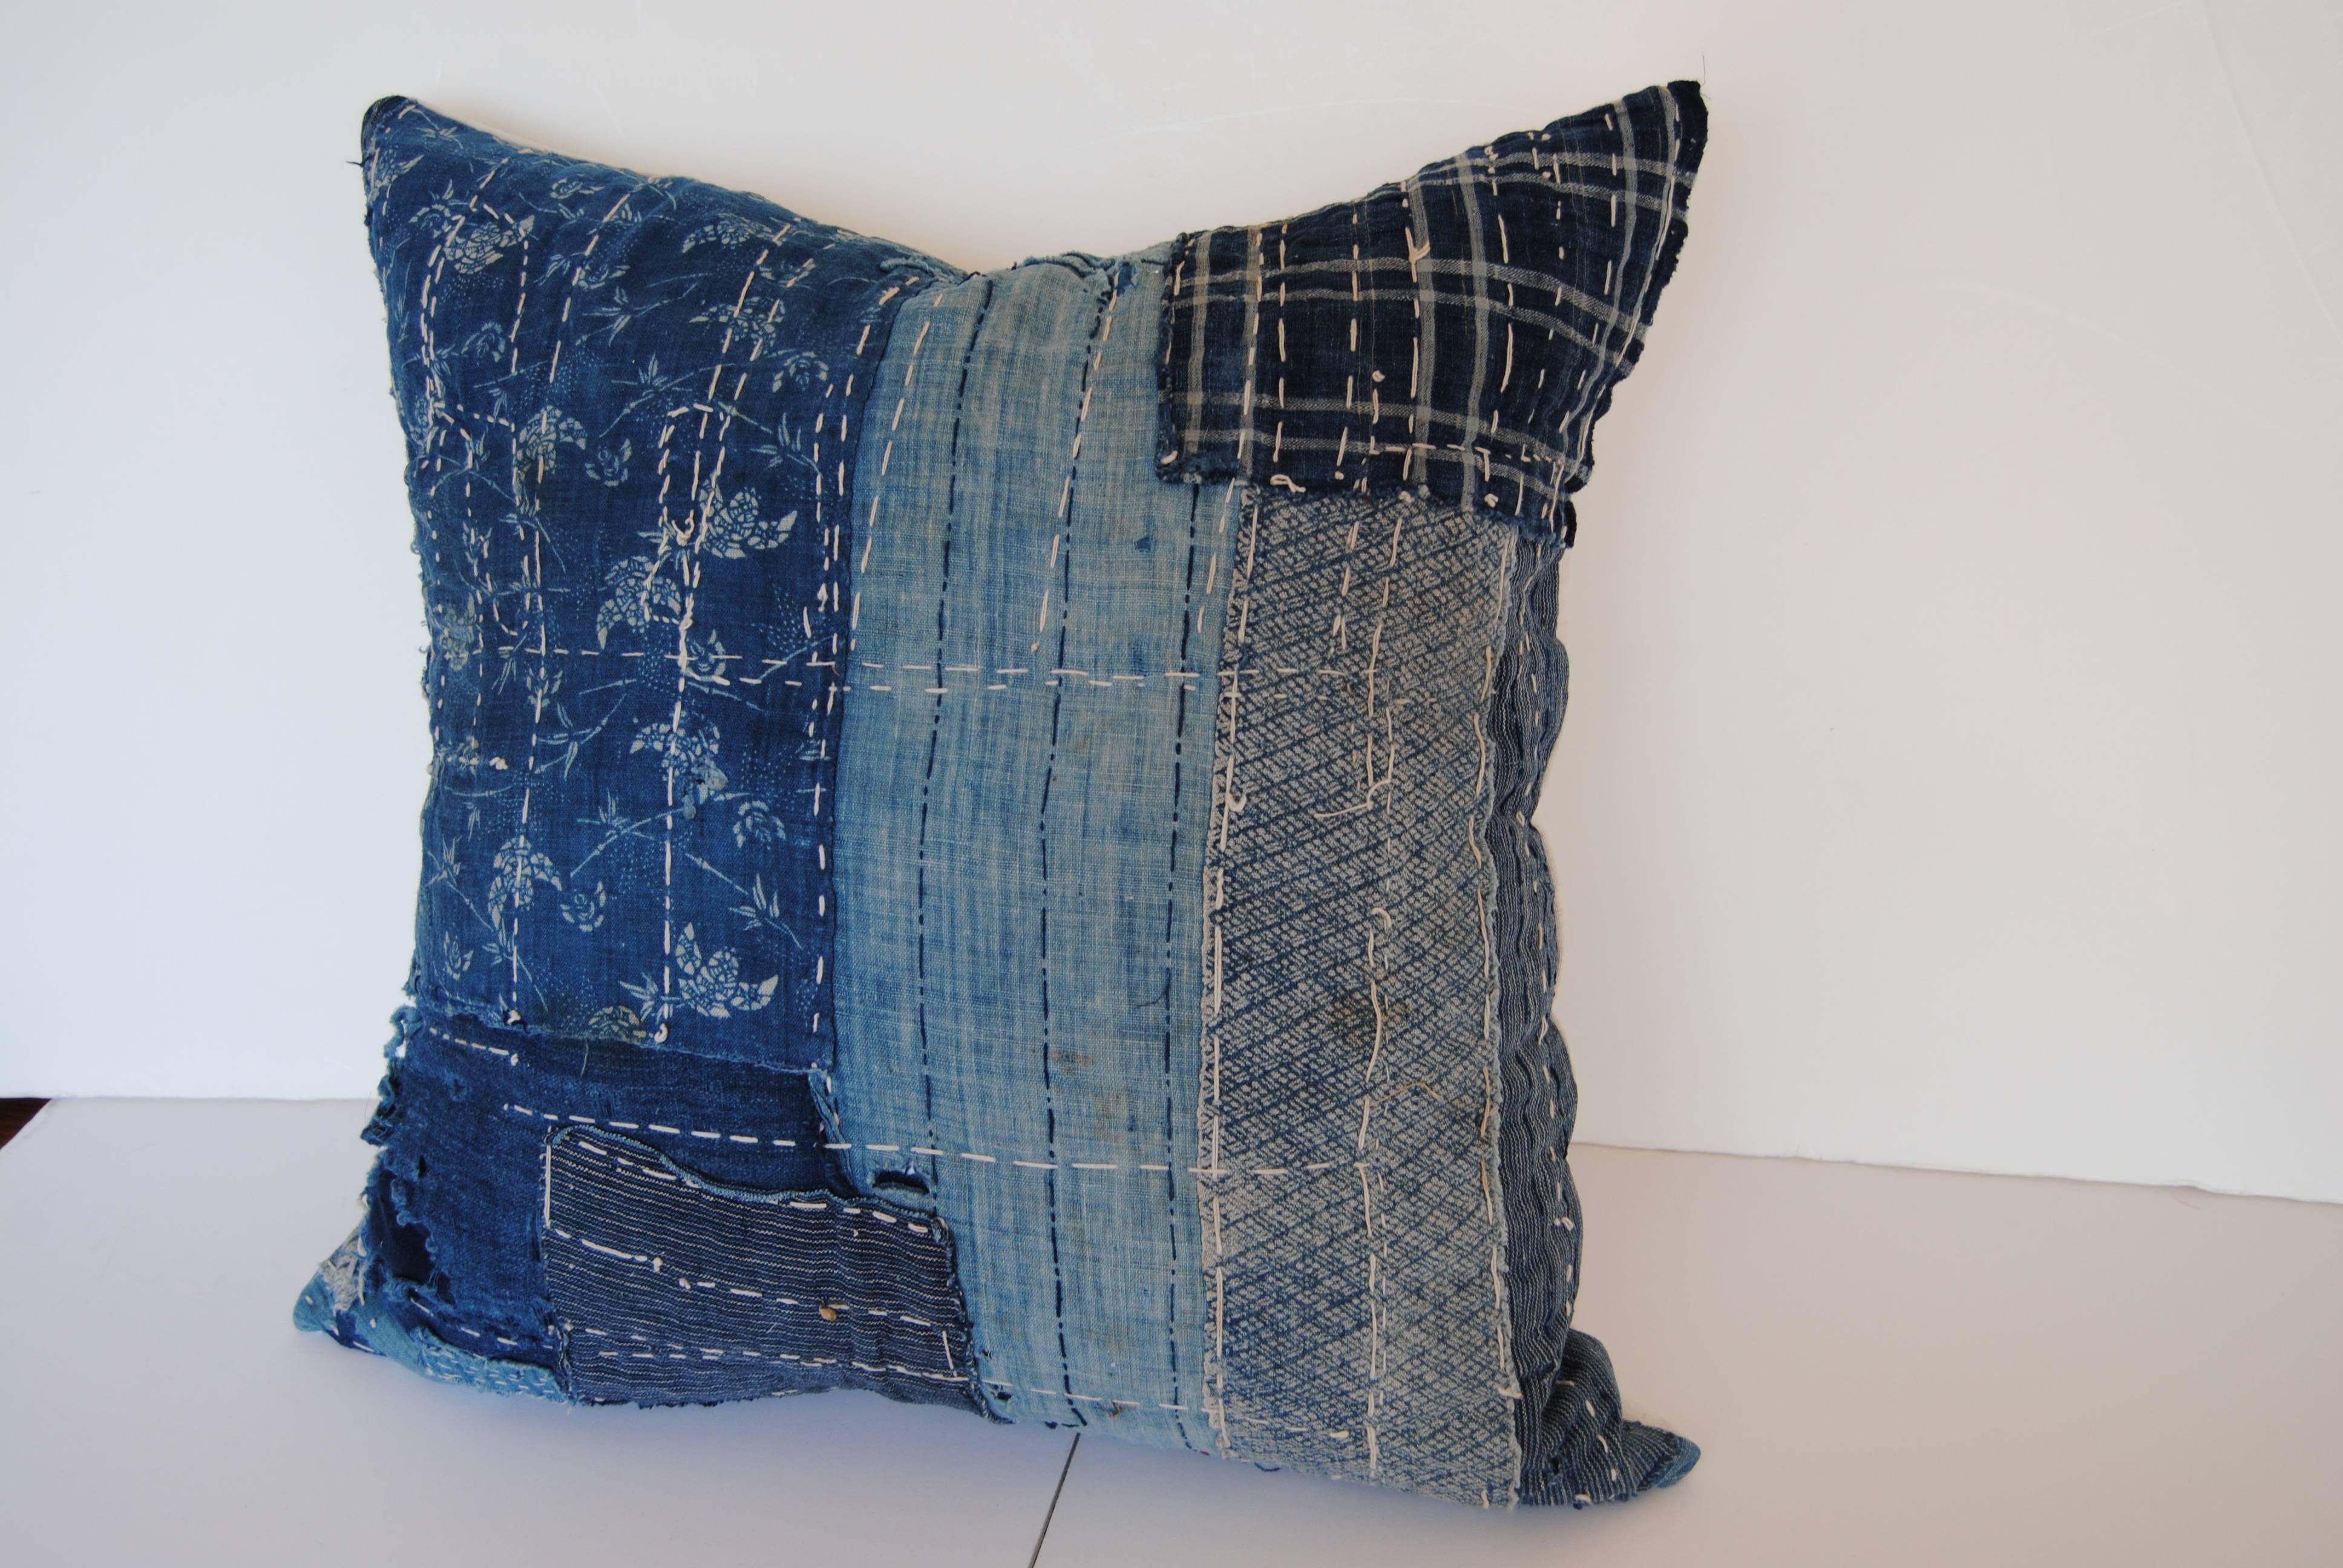 Custom pillow cut from an antique Japanese boro futon cover. The boro, meaning rags, has hand loomed cotton indigo textiles from the late 1800s to early 1900s. In some places there are up to 6 layers of cotton to cover the wear, all held together